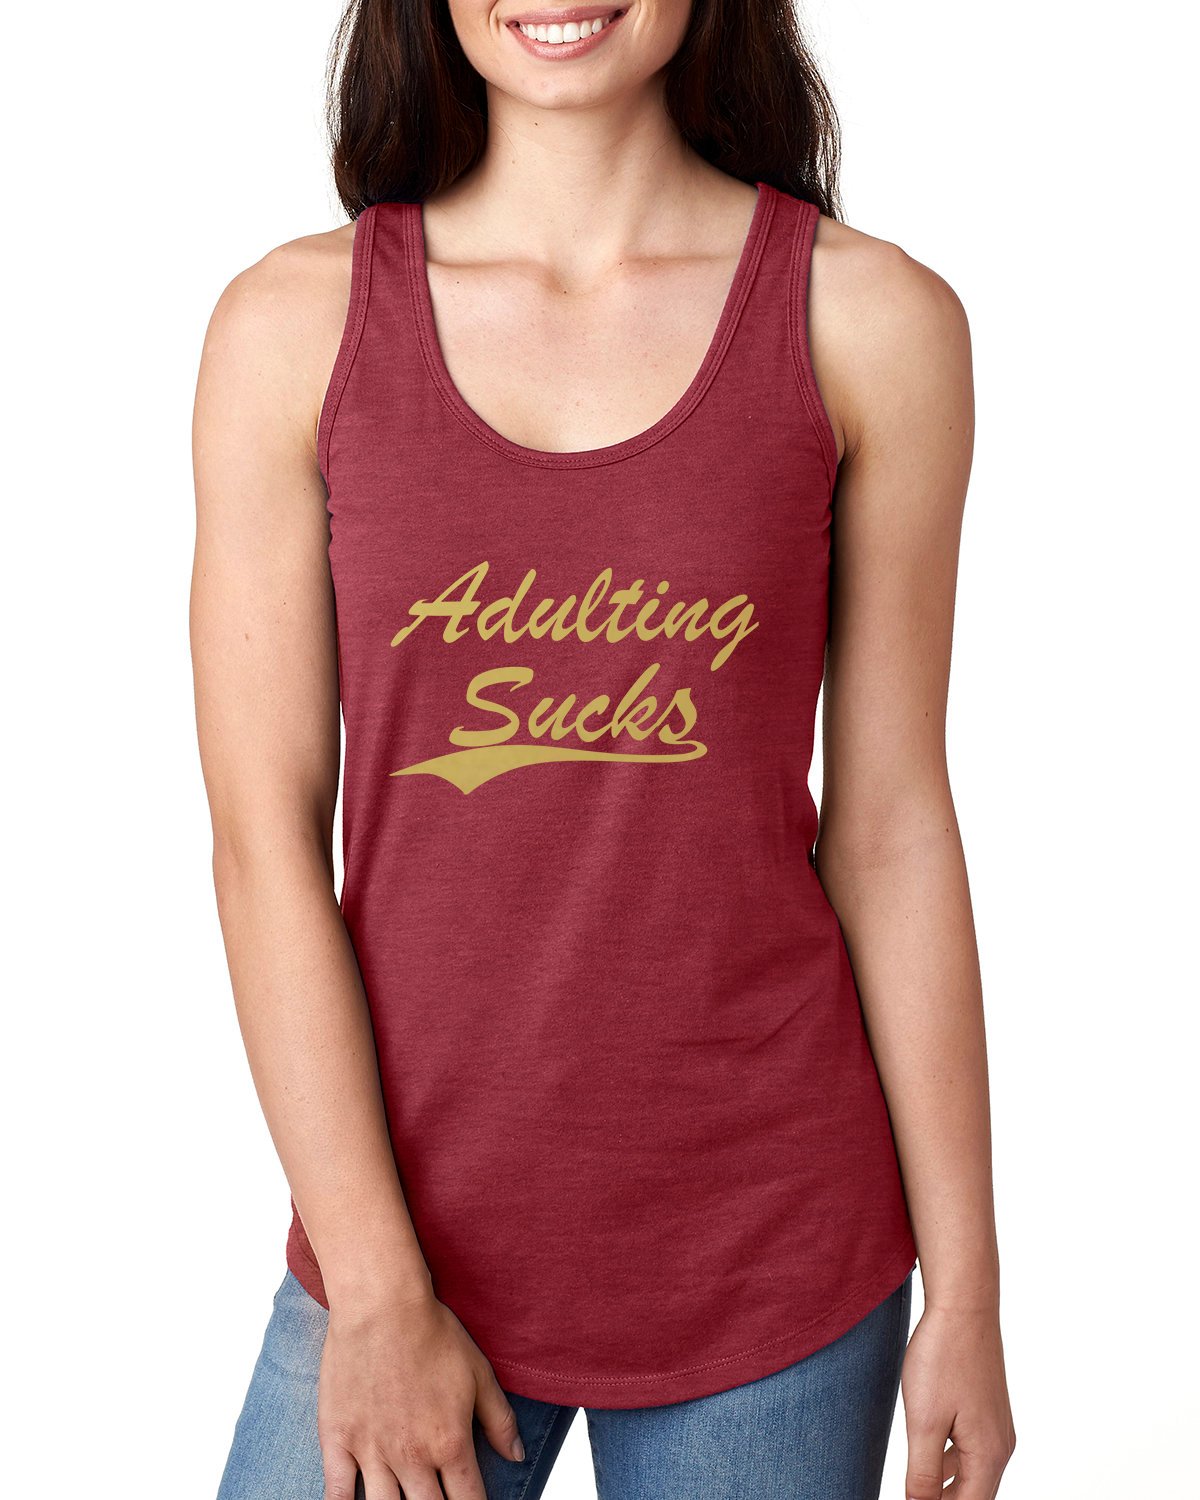 Adulting Sucks Shirt, I Cant Adult, Adulting Shirt, Graduation Present, Mom Gift, Dad Gift, Adulting is Hard, Personalize Gift